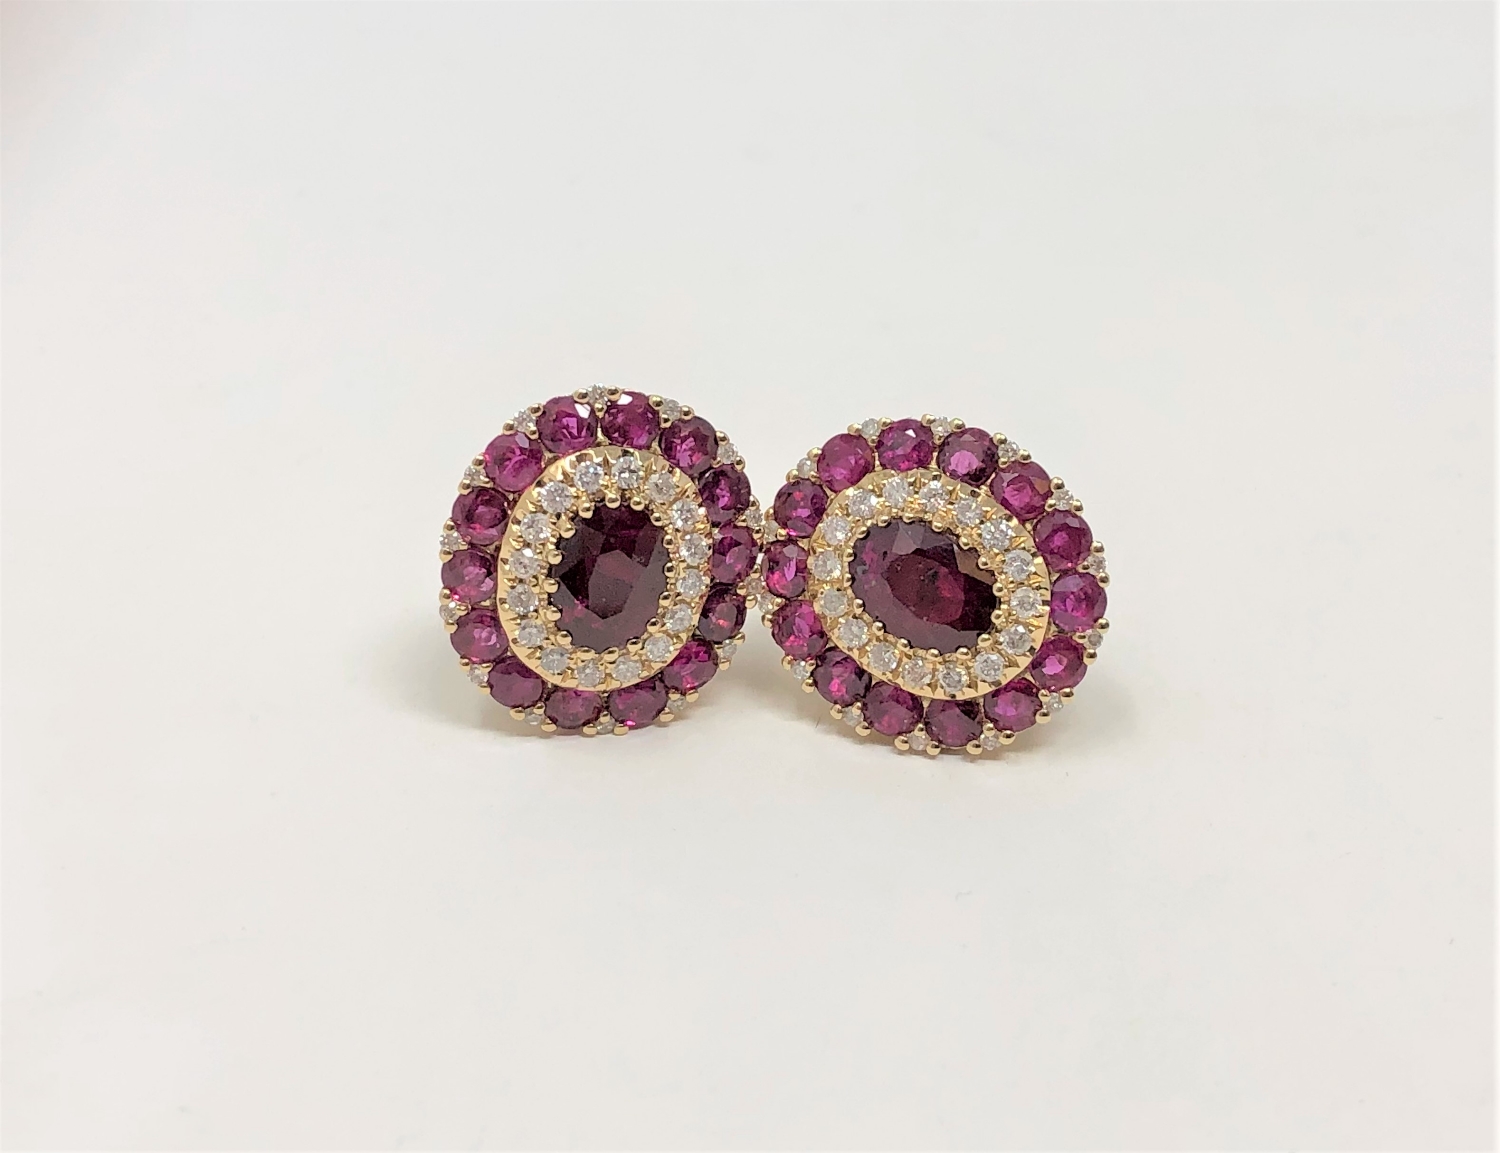 A pair of 14ct yellow gold ruby and diamond earrings featuring two oval cut rubies (1.